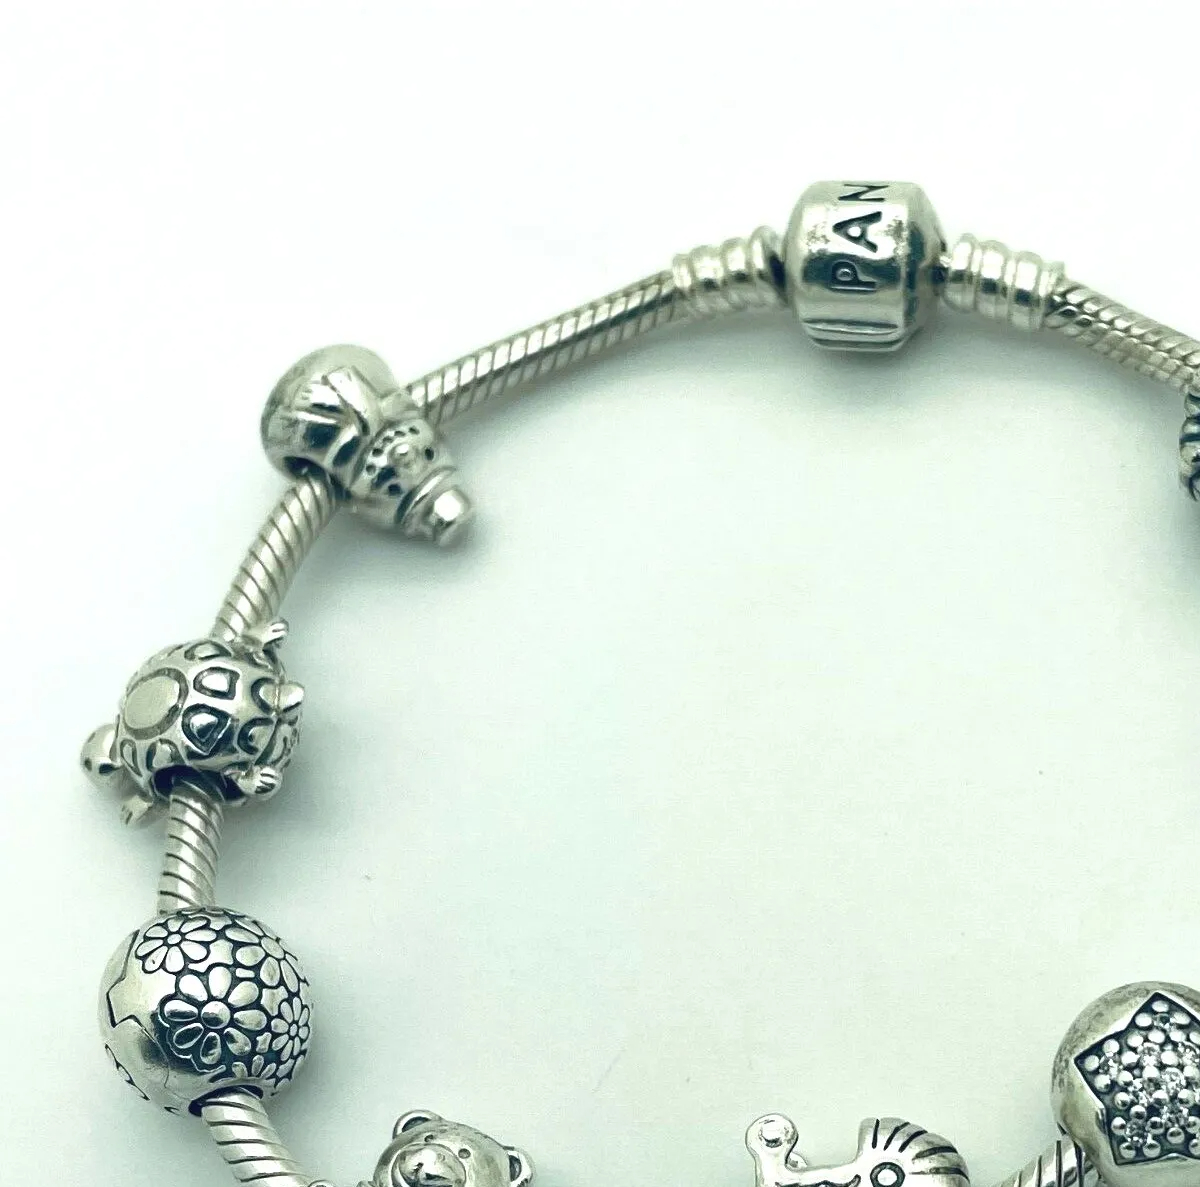 Pandora baby bracelets are specially designed jewelry pieces for infants and young children, offering a range of benefits and advantages.